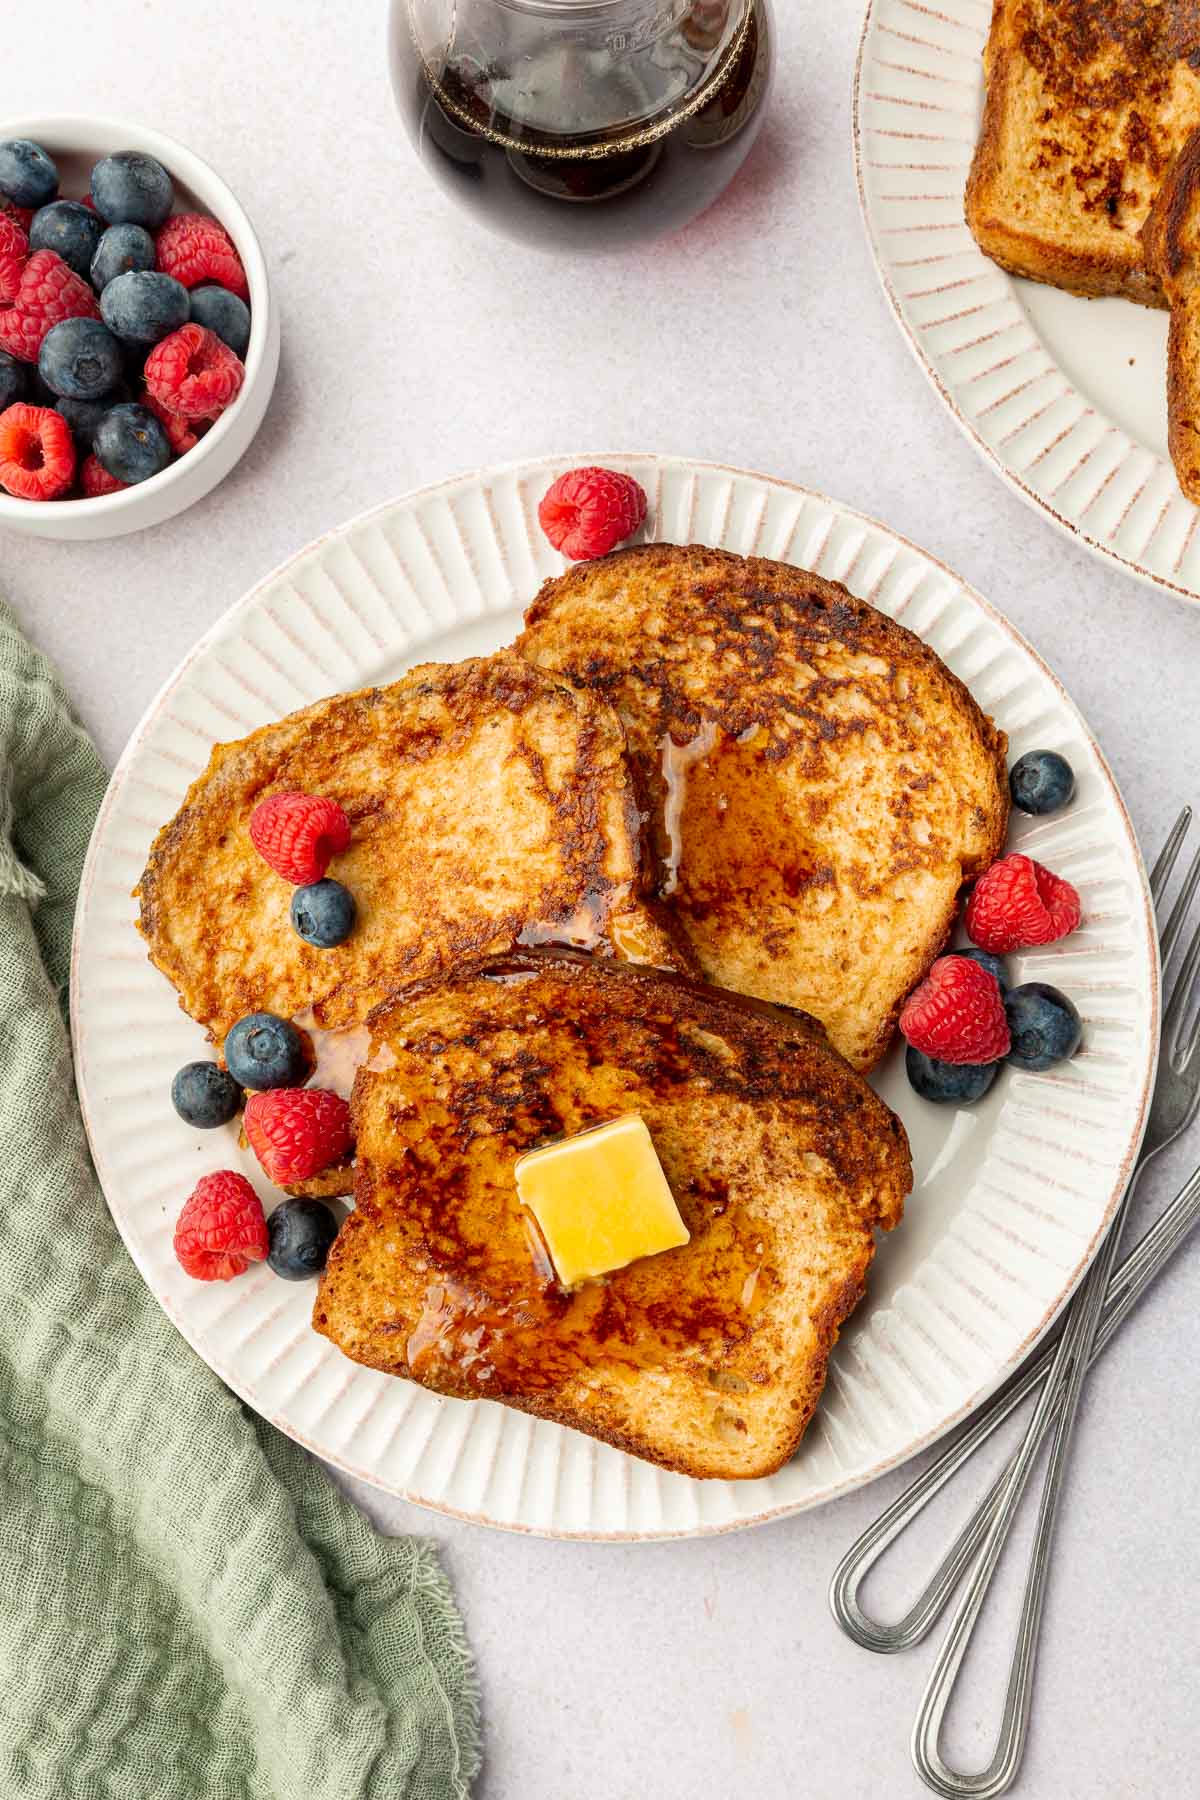 A plate with three slices of gluten-free french toast topped with butter, maple syrup, blueberries and raspberries with additional french toast and berries to the side.